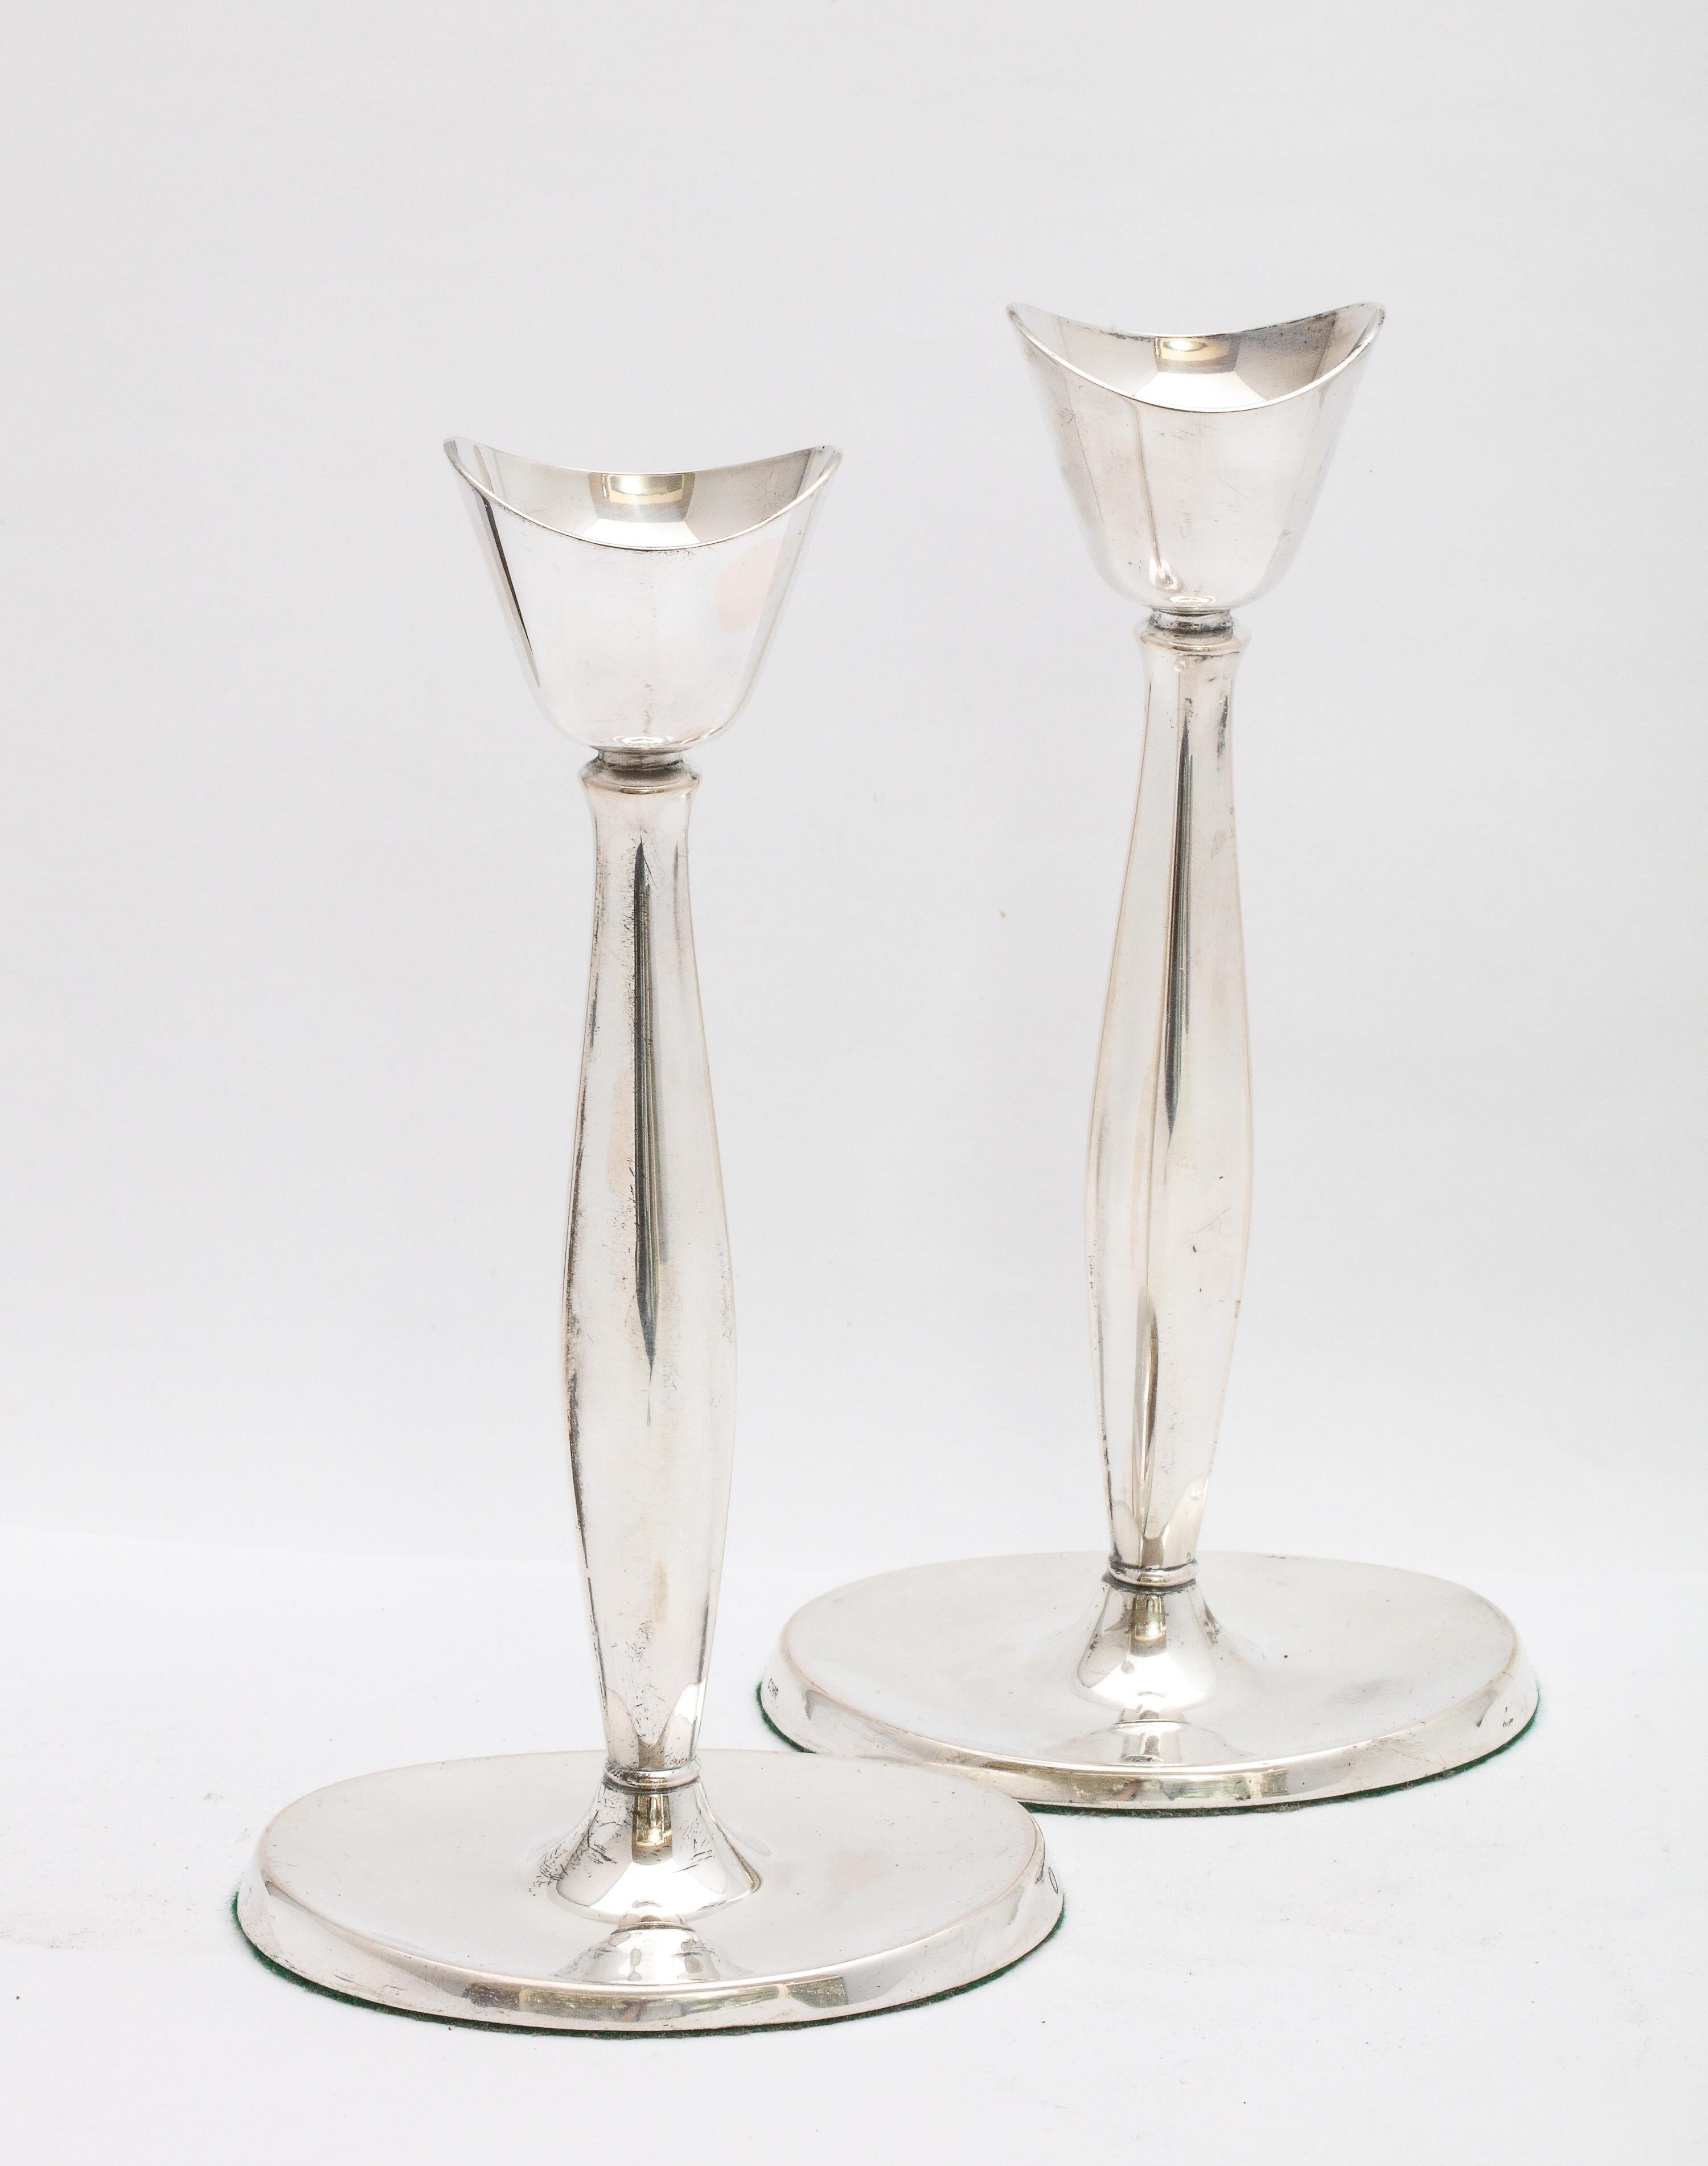 Pair of Mid-Century Modern Danish Sterling Silver Candlesticks by Cohr In Good Condition For Sale In New York, NY